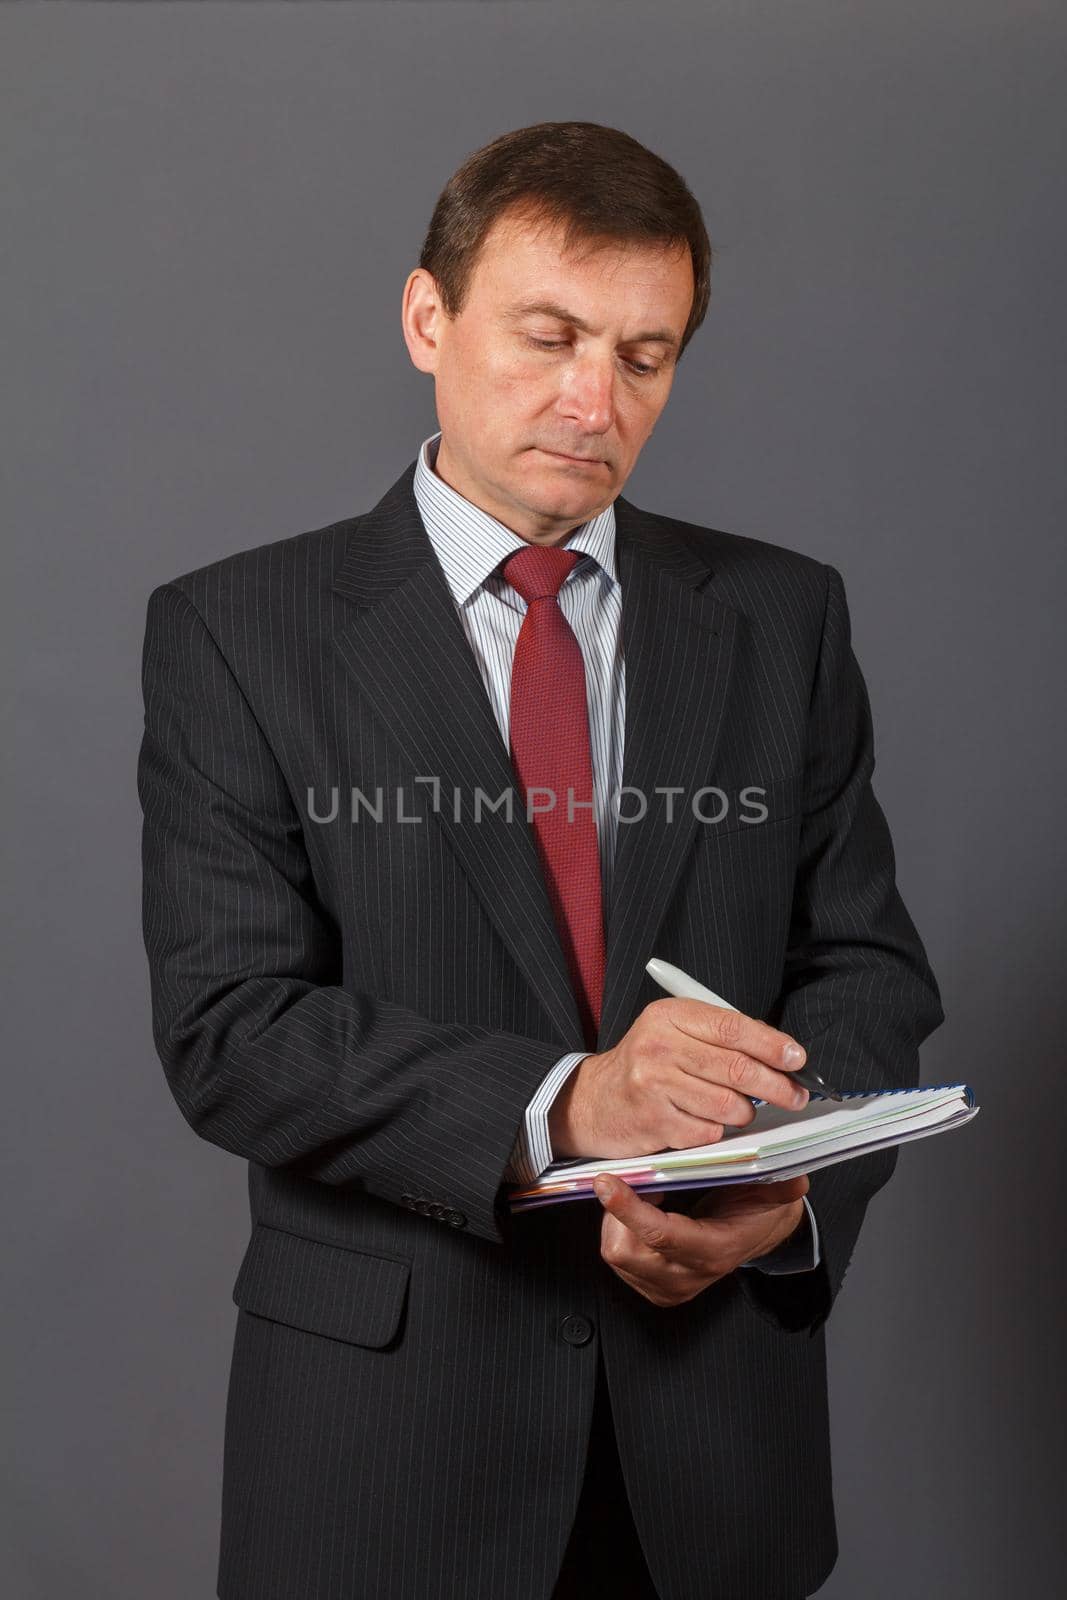 Confident and friendly elegant handsome mature businessman standing in front of a gray background holding a marker and writing in a notebook